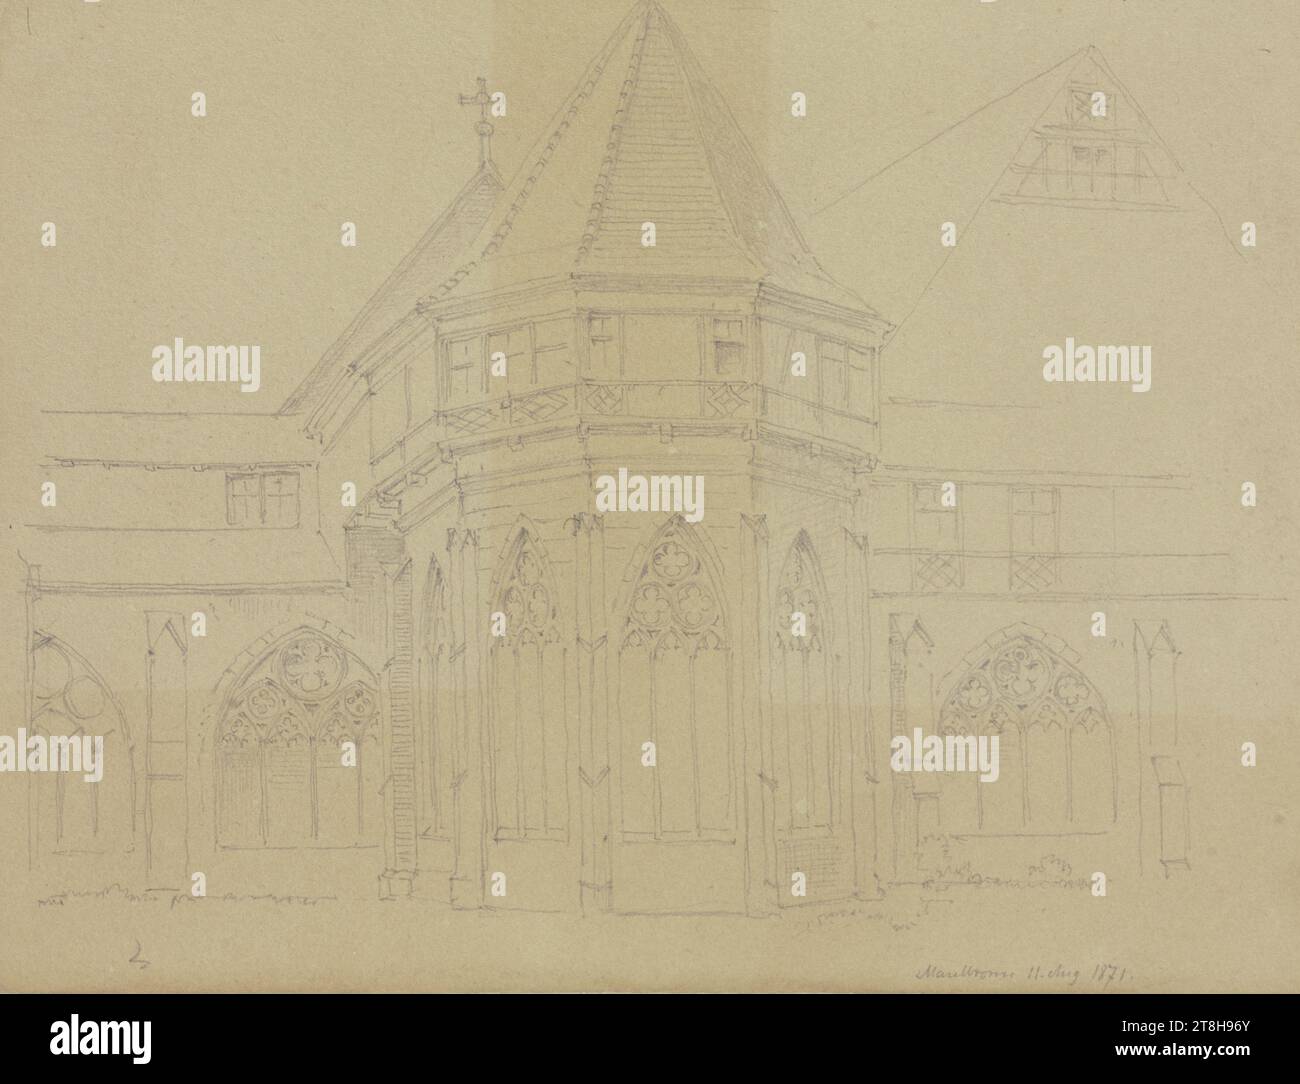 CARL THEODOR REIFFENSTEIN, fountain chapel in the cloister of the Maulbronn monastery, August 11, 1871, sheet, 118 x 156 mm, pencil on paper, fountain chapel in the cloister of the Maulbronn monastery, CARL THEODOR REIFFENSTEIN, page, adhesive tapes, volume 30, page 49, part number / overall, 3 / 3, MAULBRONN MONASTERY, 19TH CENTURY, DRAWING, pencil on paper, GRAPHITE-CLAY MIXTURE, PAPER, PENCIL DRAWING, GERMAN, ARCHITECTURAL STUDY, TRAVEL STUDY, Dated and inscribed lower right, in pencil, Maulbronn Aug 11, 1871 ., Numbered on the page below the drawing, in pencil, 3 Stock Photo